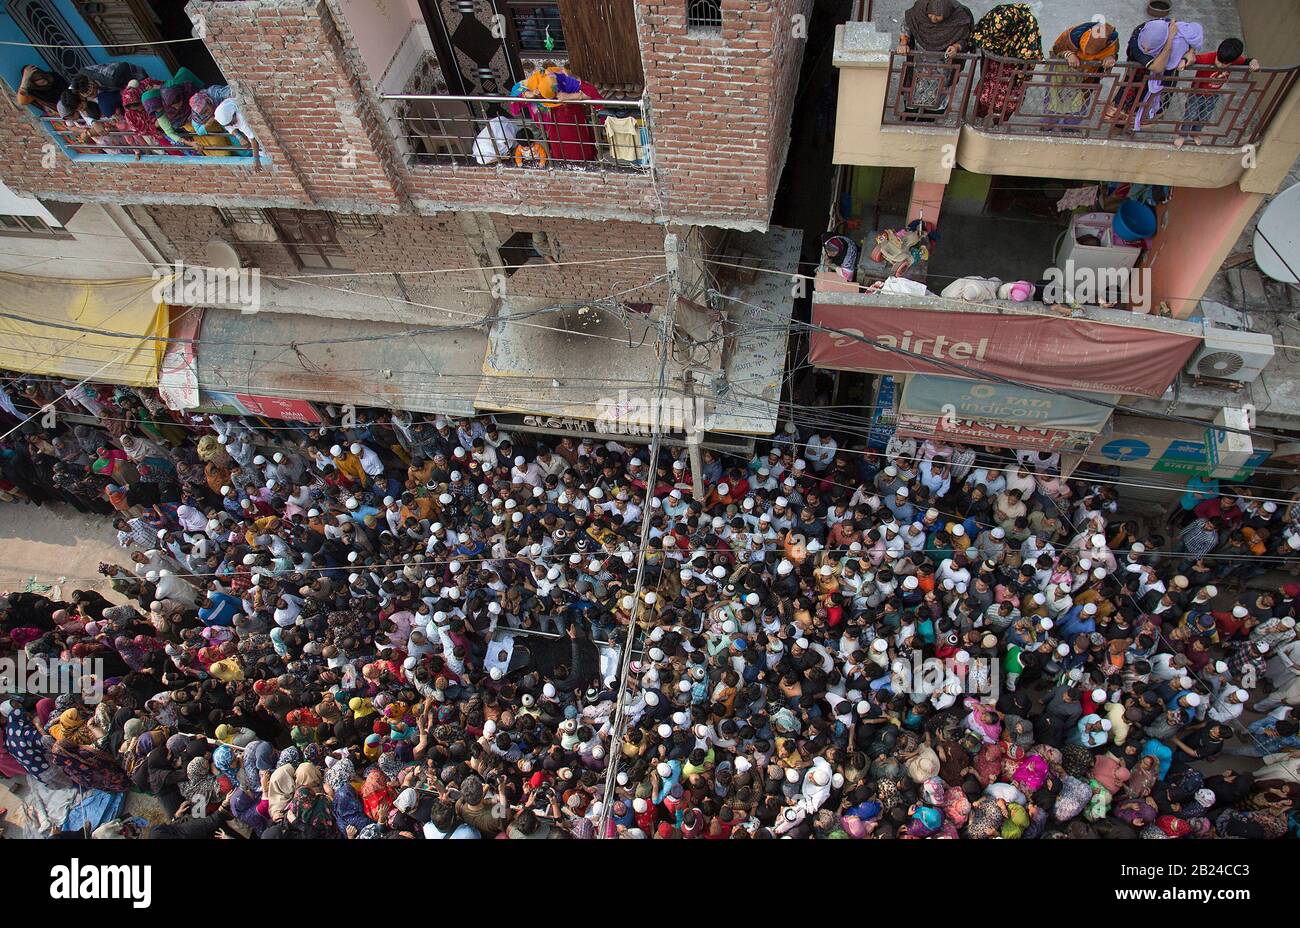 New Delhi. 29th Feb, 2020. People carry the body of a riot victim during his funeral procession in The death toll during communal violence in Delhi Friday evening rose to 42, officials said. Credit: Javed Dar/Xinhua/Alamy Live News Stock Photo